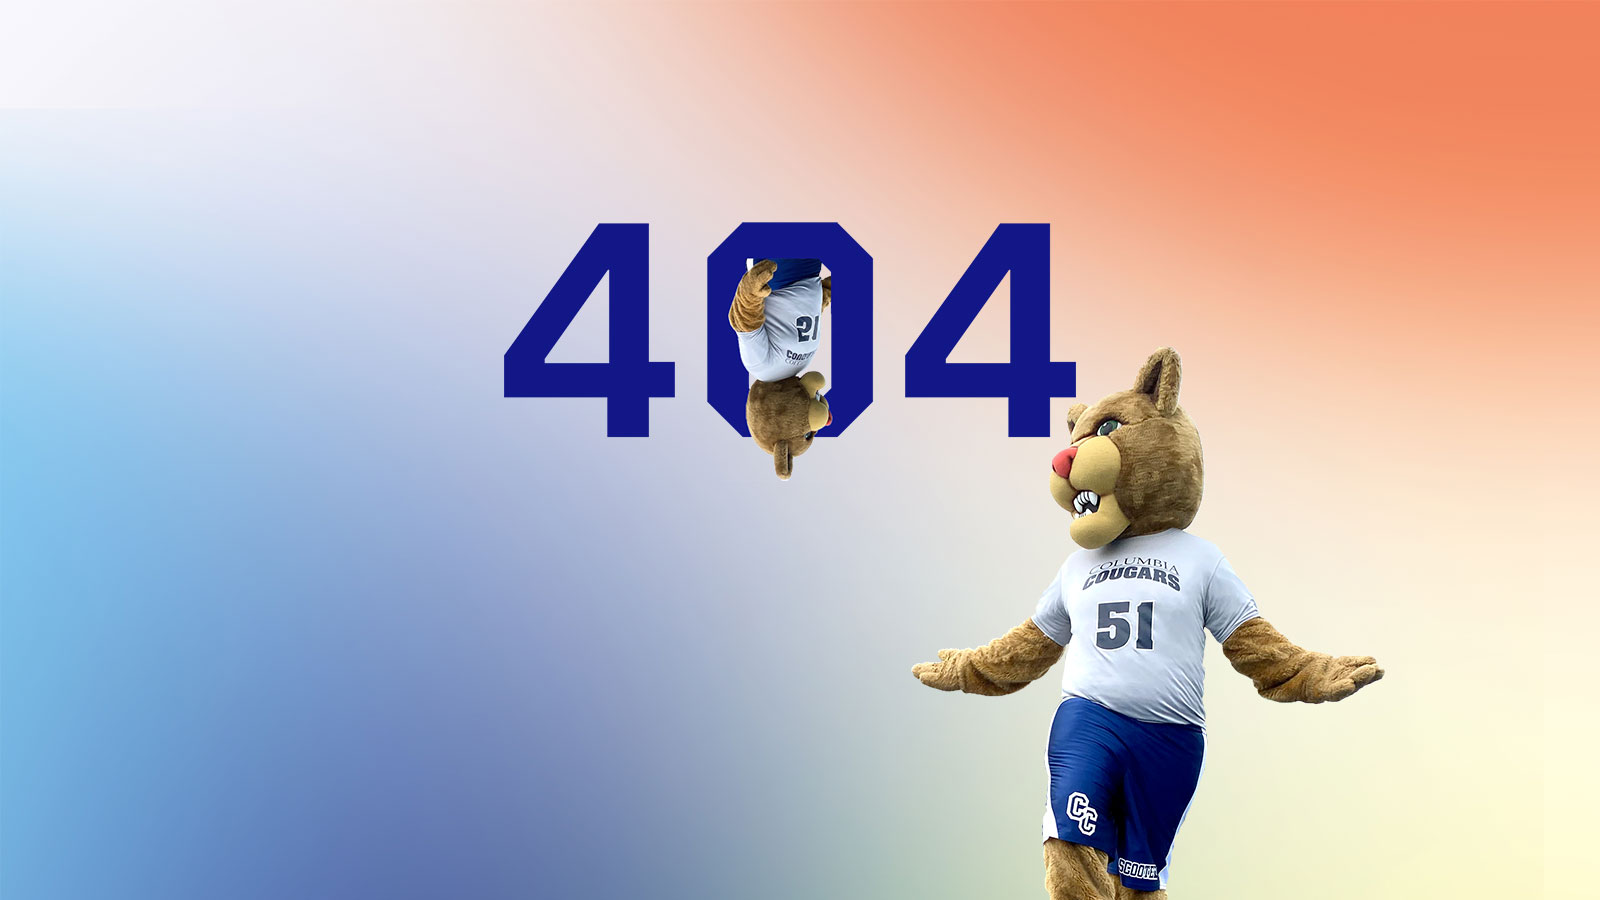 Scooter the Cougar announcing you've reached a 404 error page